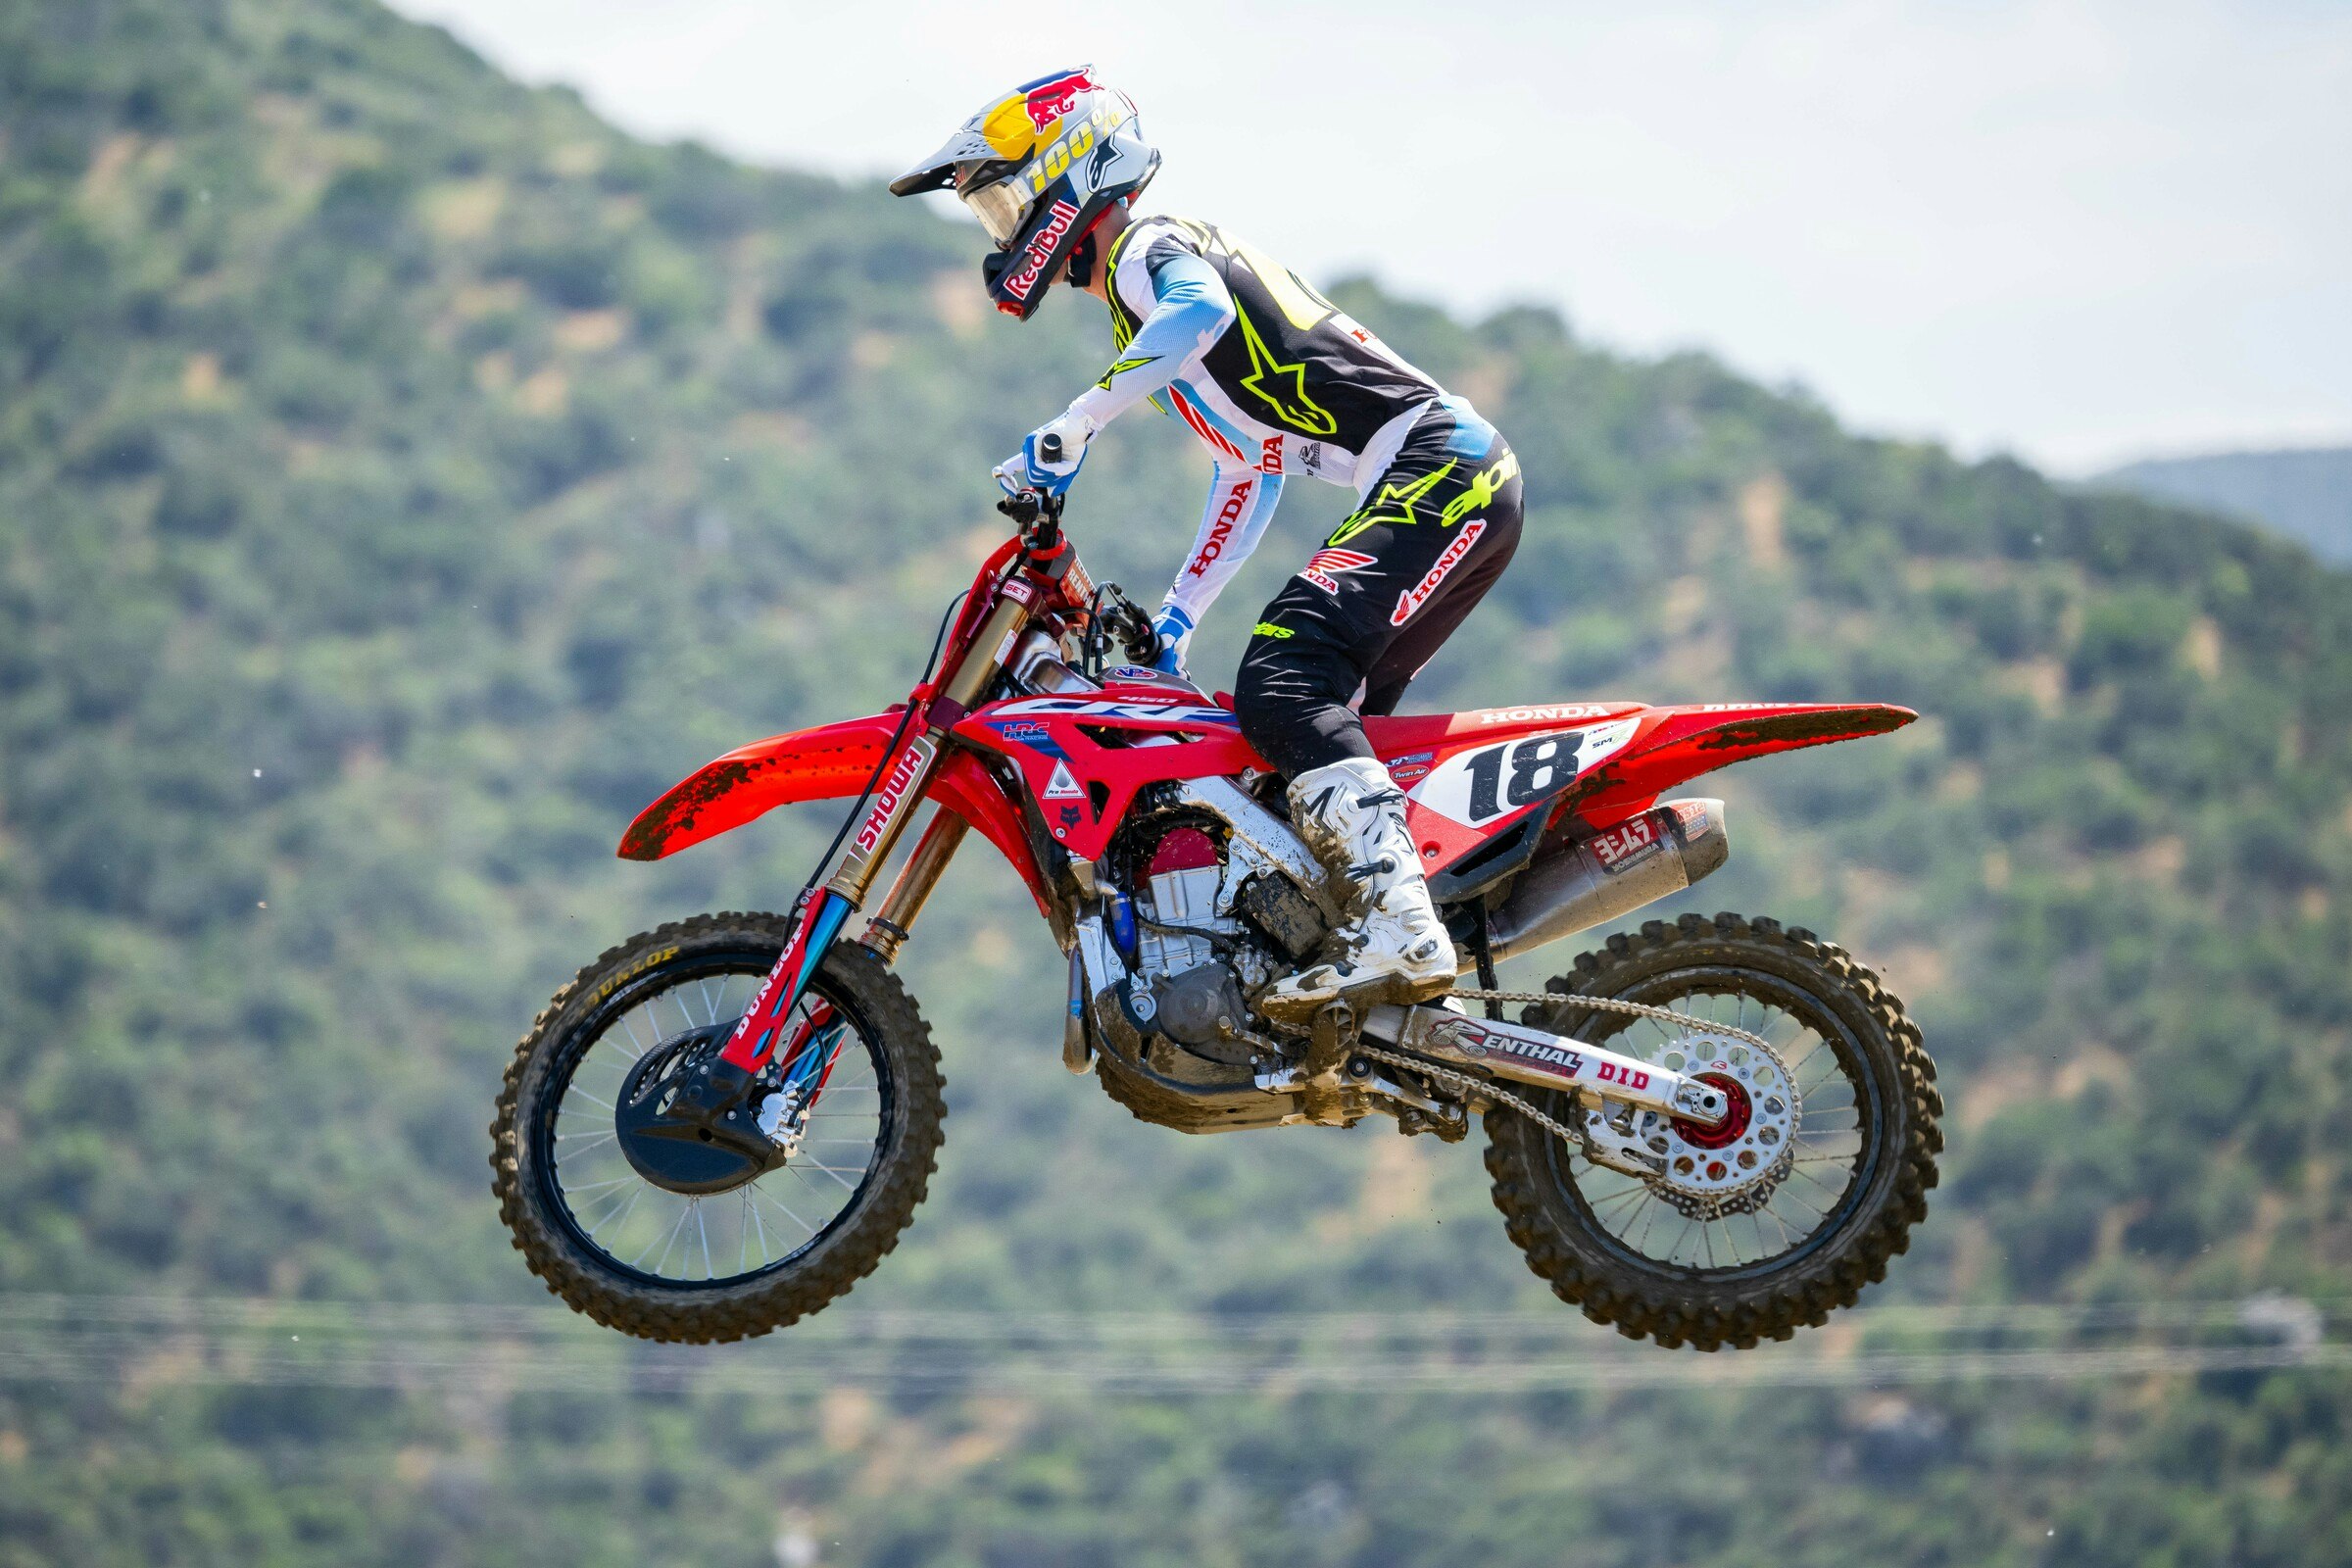 Previewing the 2023 AMA Pro Motocross Championship